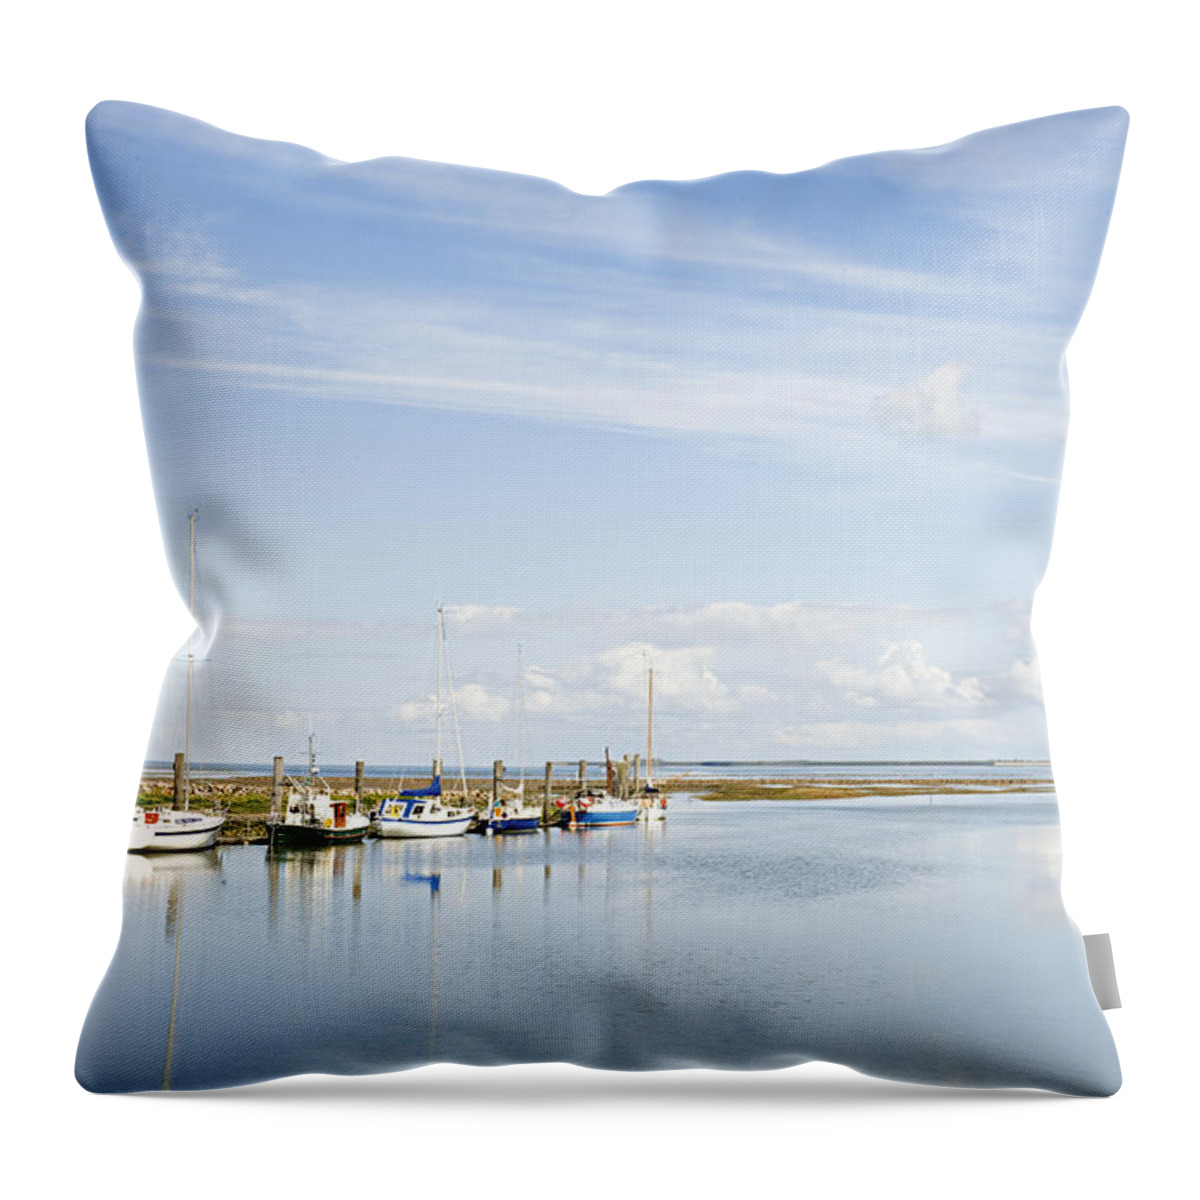 Ip_10249345 Throw Pillow featuring the photograph View Of Marina At Husum, Schleswig-holstein, Germany by Jalag / Drthe Hagenguth